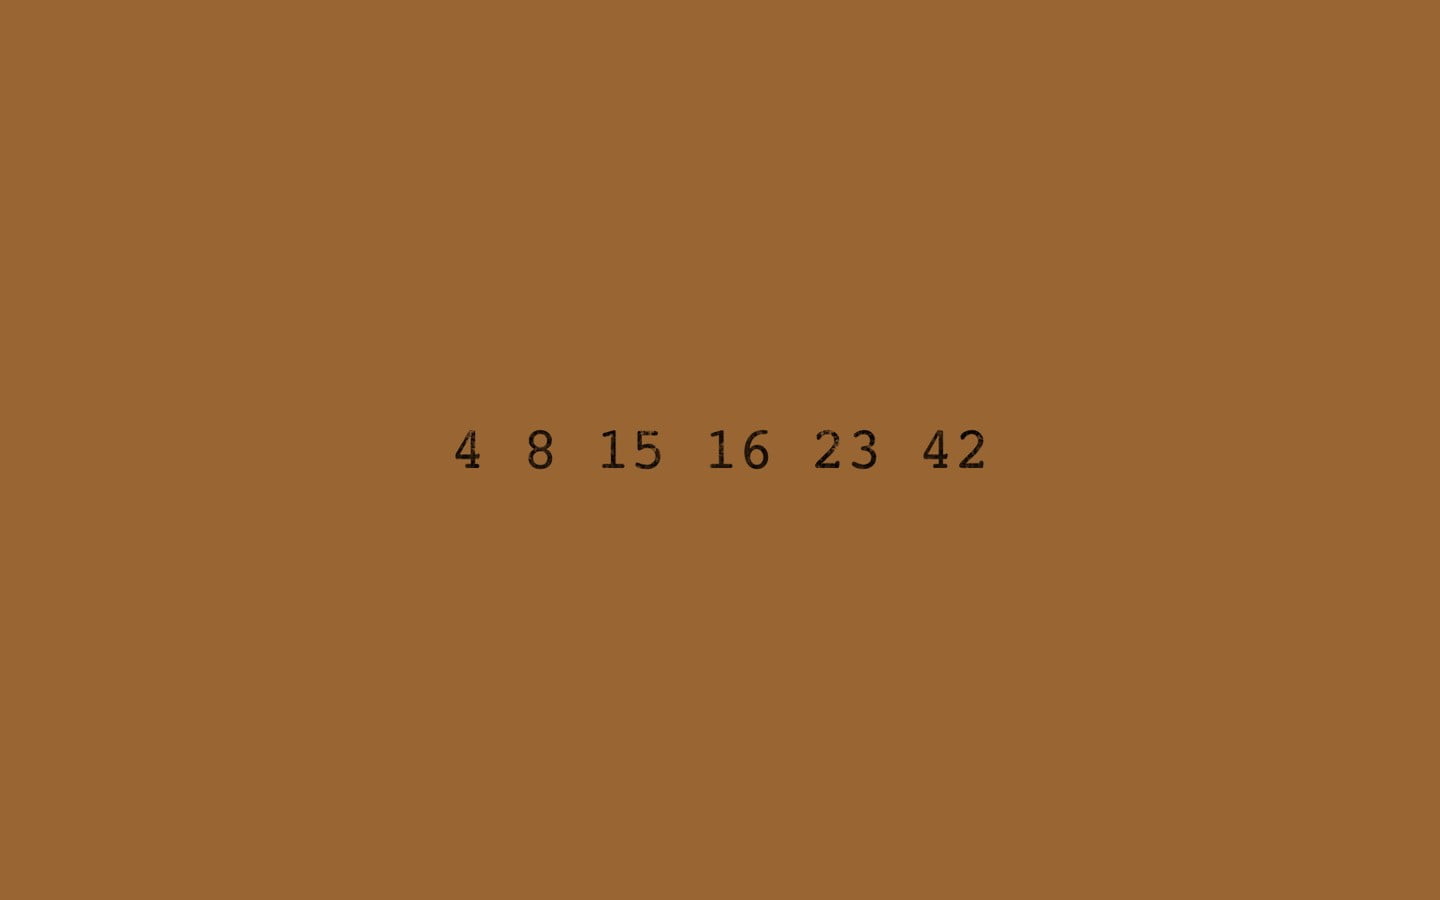 number text screenshot, numbers, simple, Lost, brown background